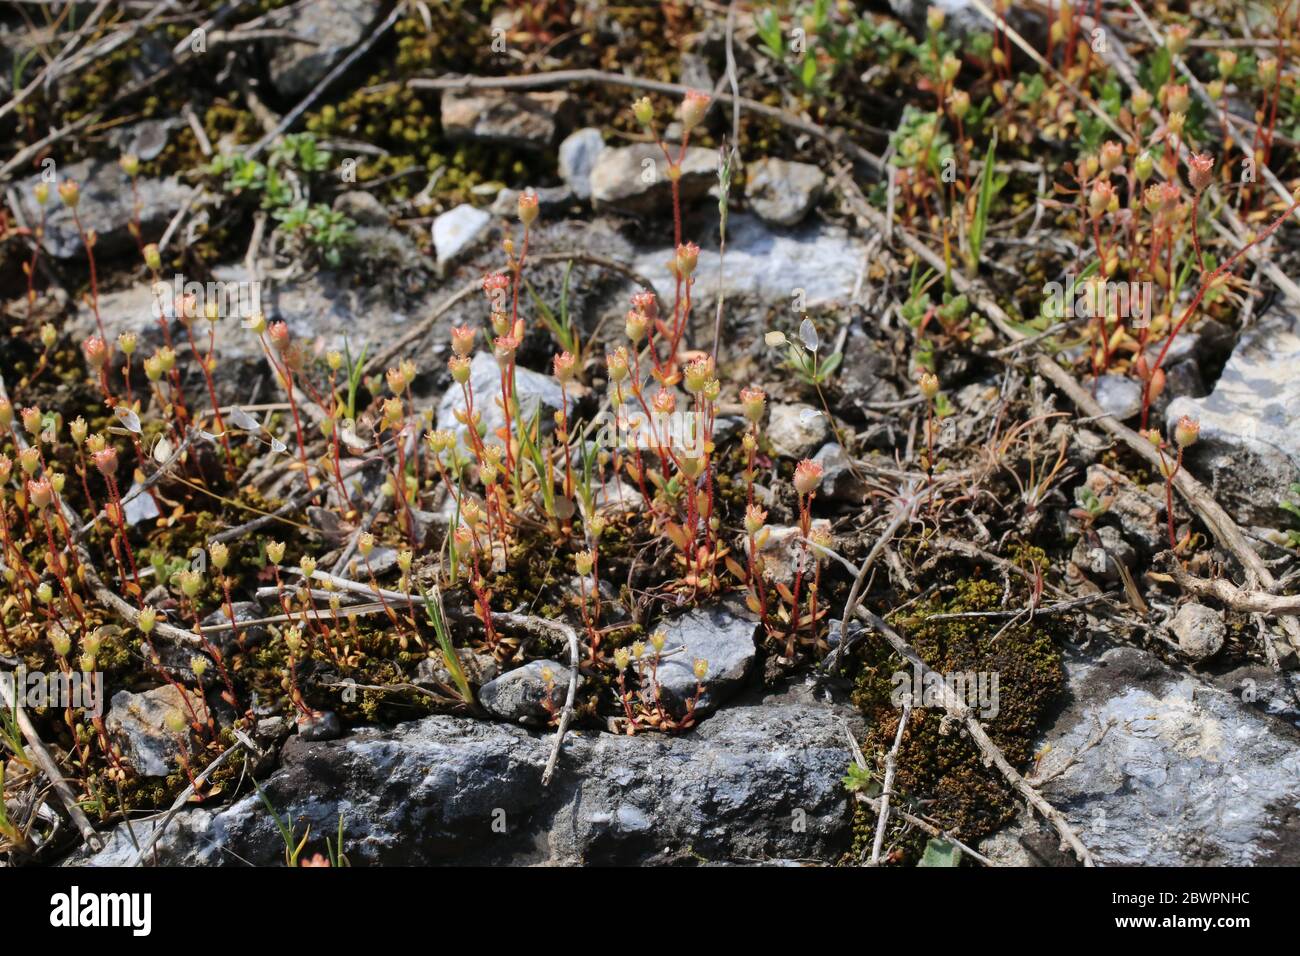 Saxifraga tridactylites, Rue-Leaved Saxifrage. Wild plant shot in the spring. Stock Photo